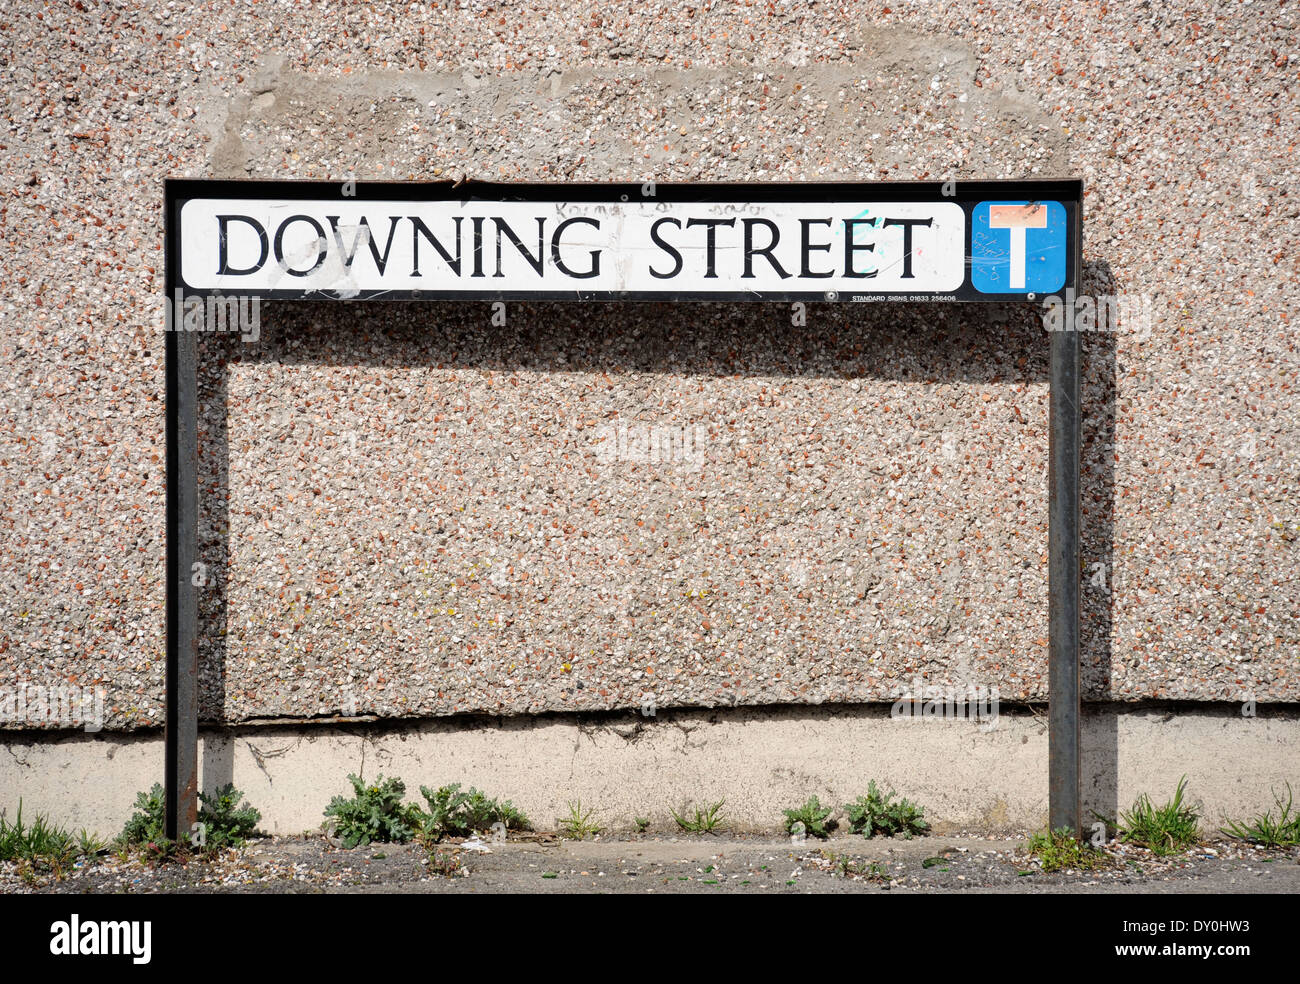 A Downing Street sign in Newport, S Wales - a name shared with the Prime Ministers residence in Westminster, London UK Stock Photo